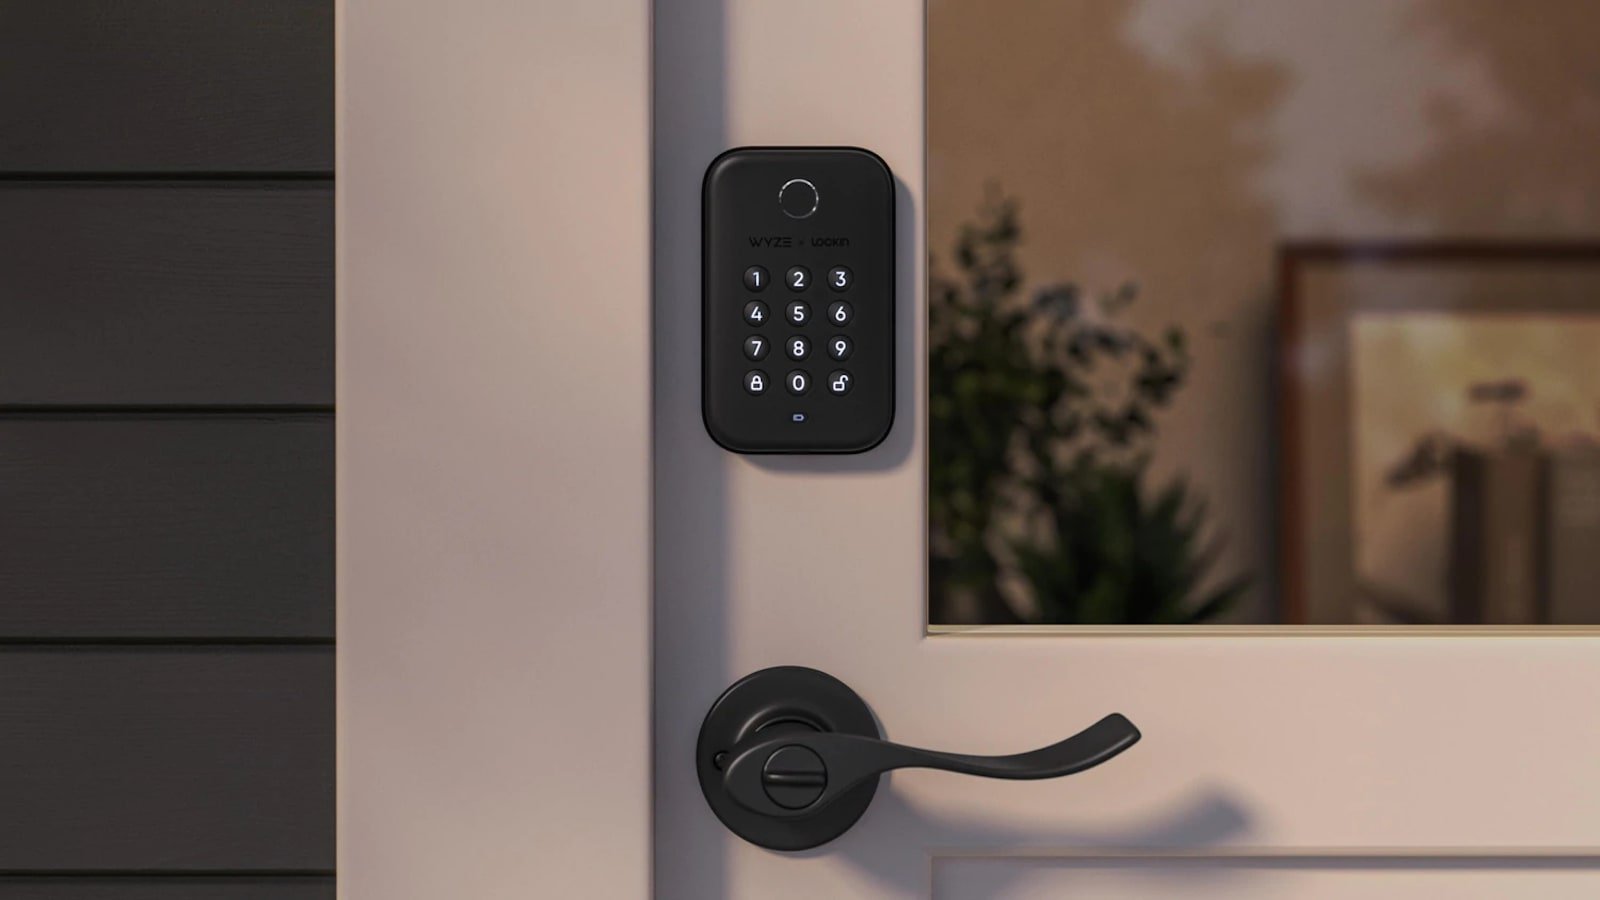 Wyze Lock Bolt features an anti-peep backlit keypad and a useful auto-lock timer